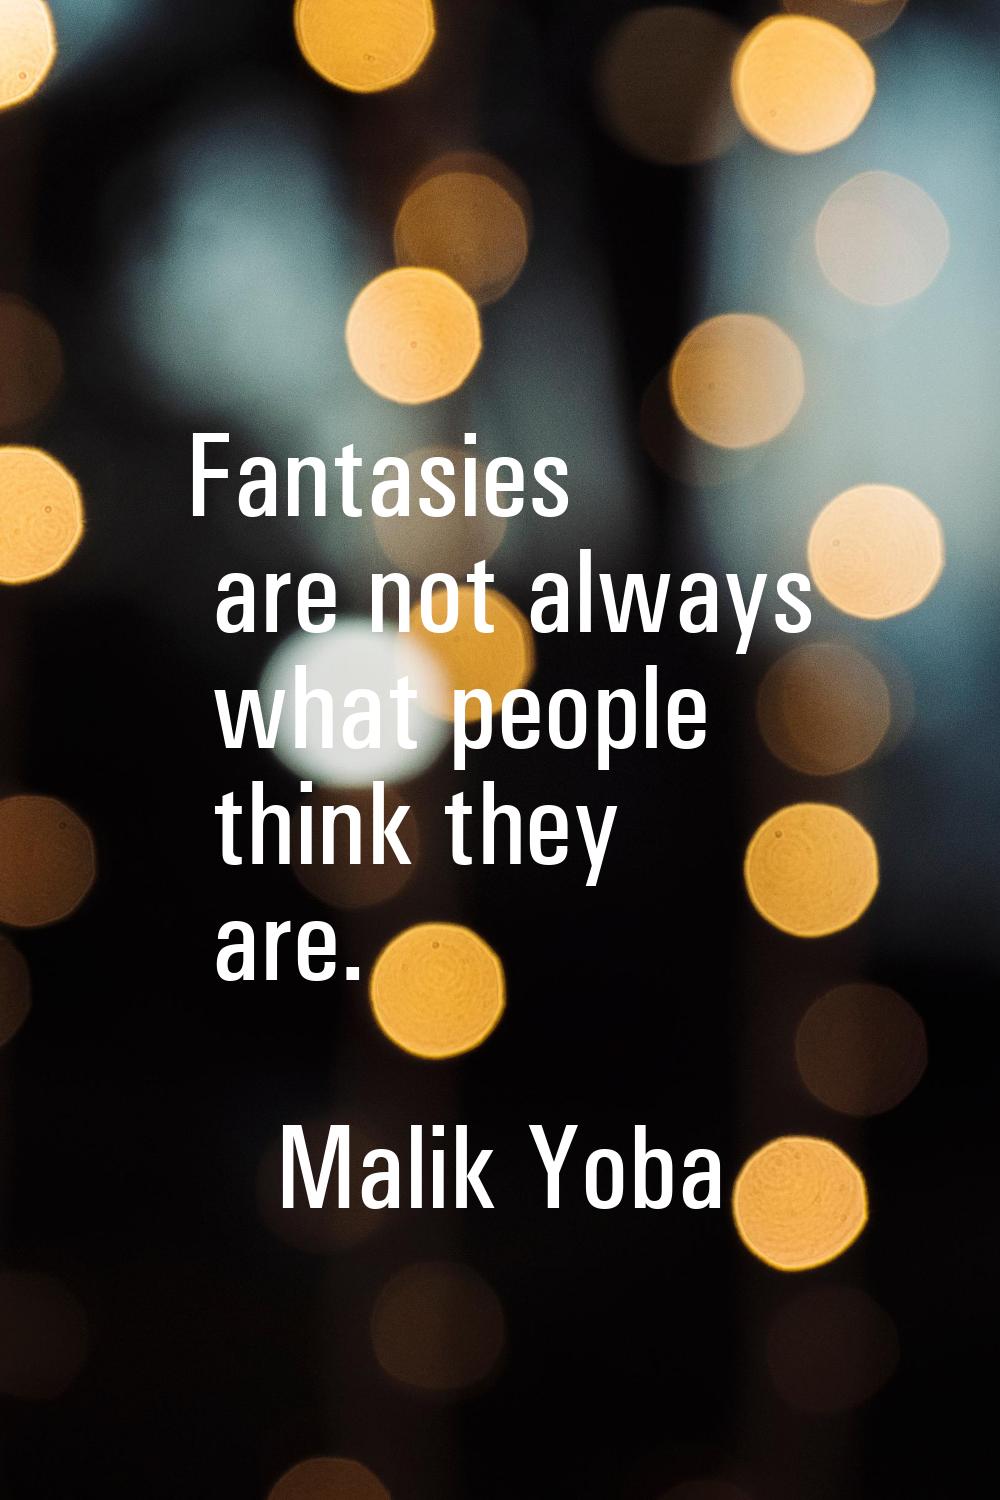 Fantasies are not always what people think they are.